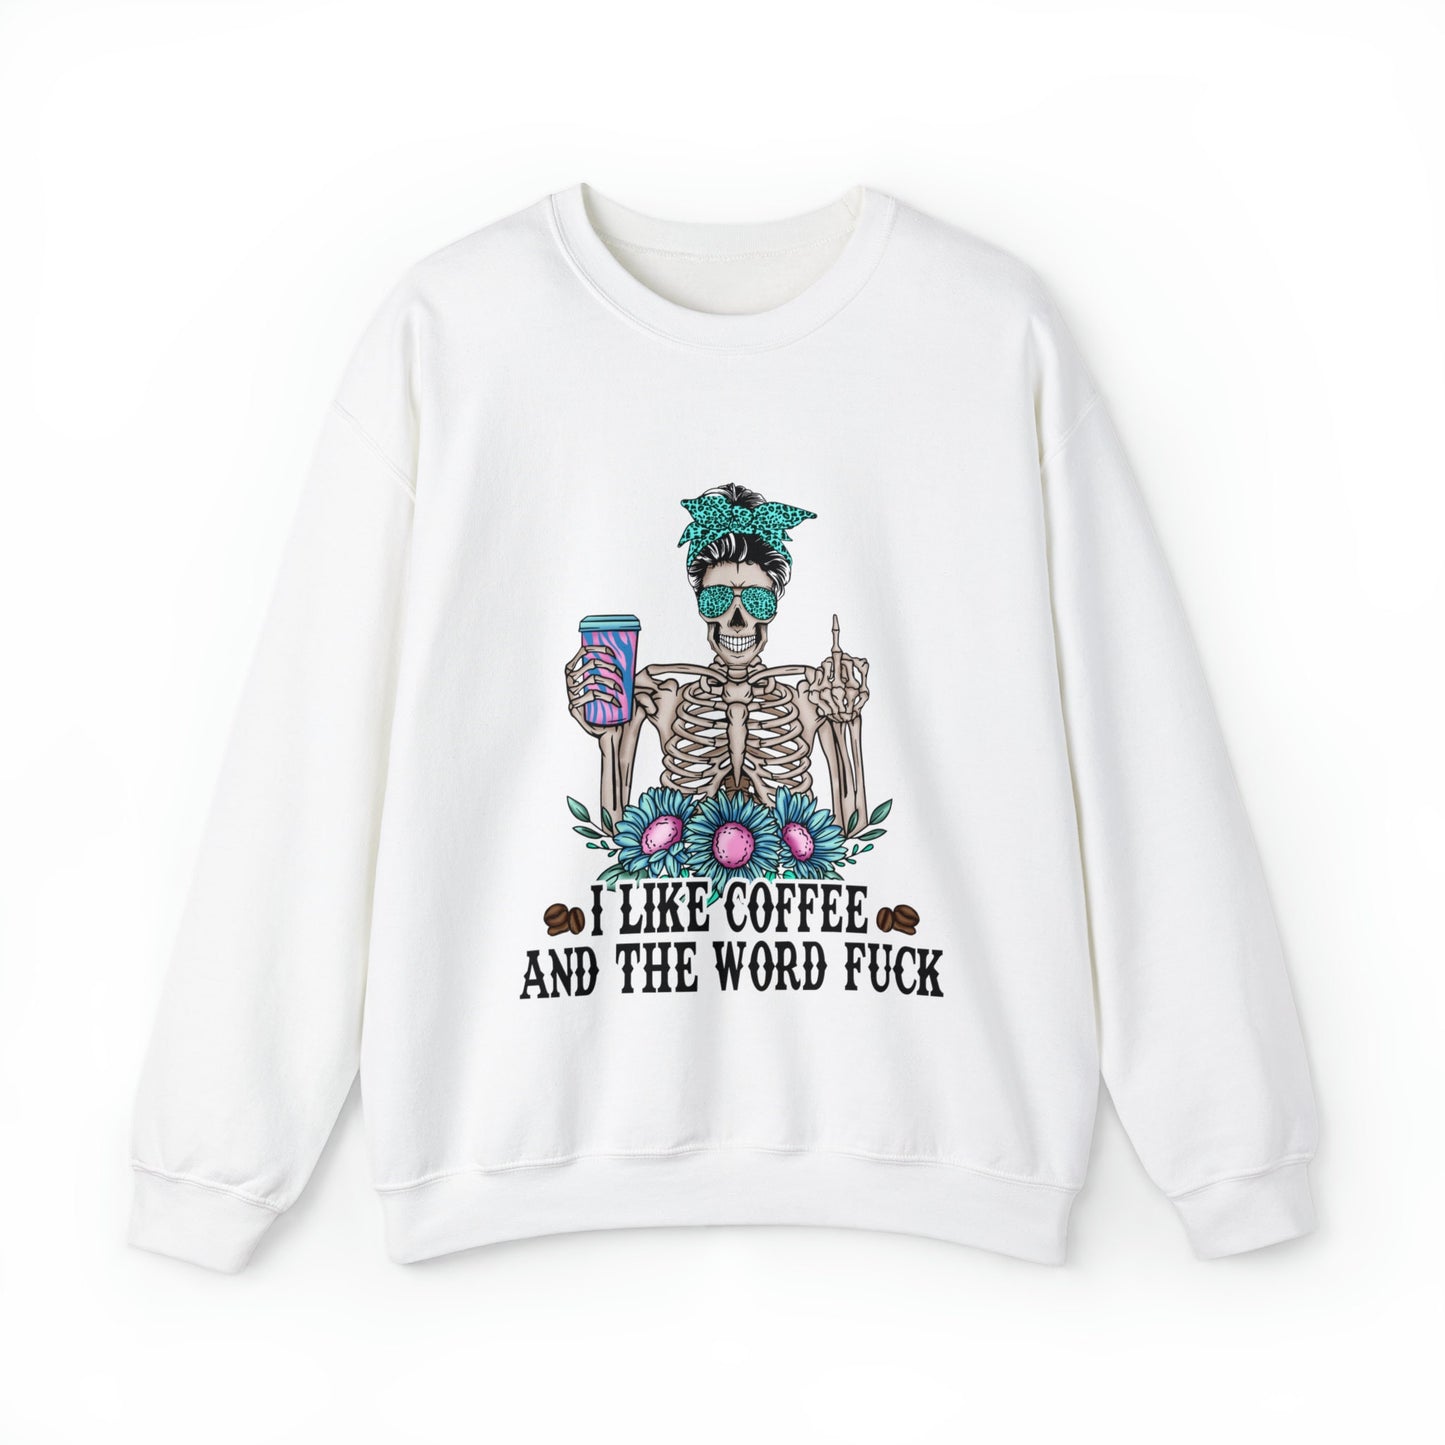 Caffeine-Infused Halloween Sweatshirt - Coffee Lover's Delight with a Bold Statement